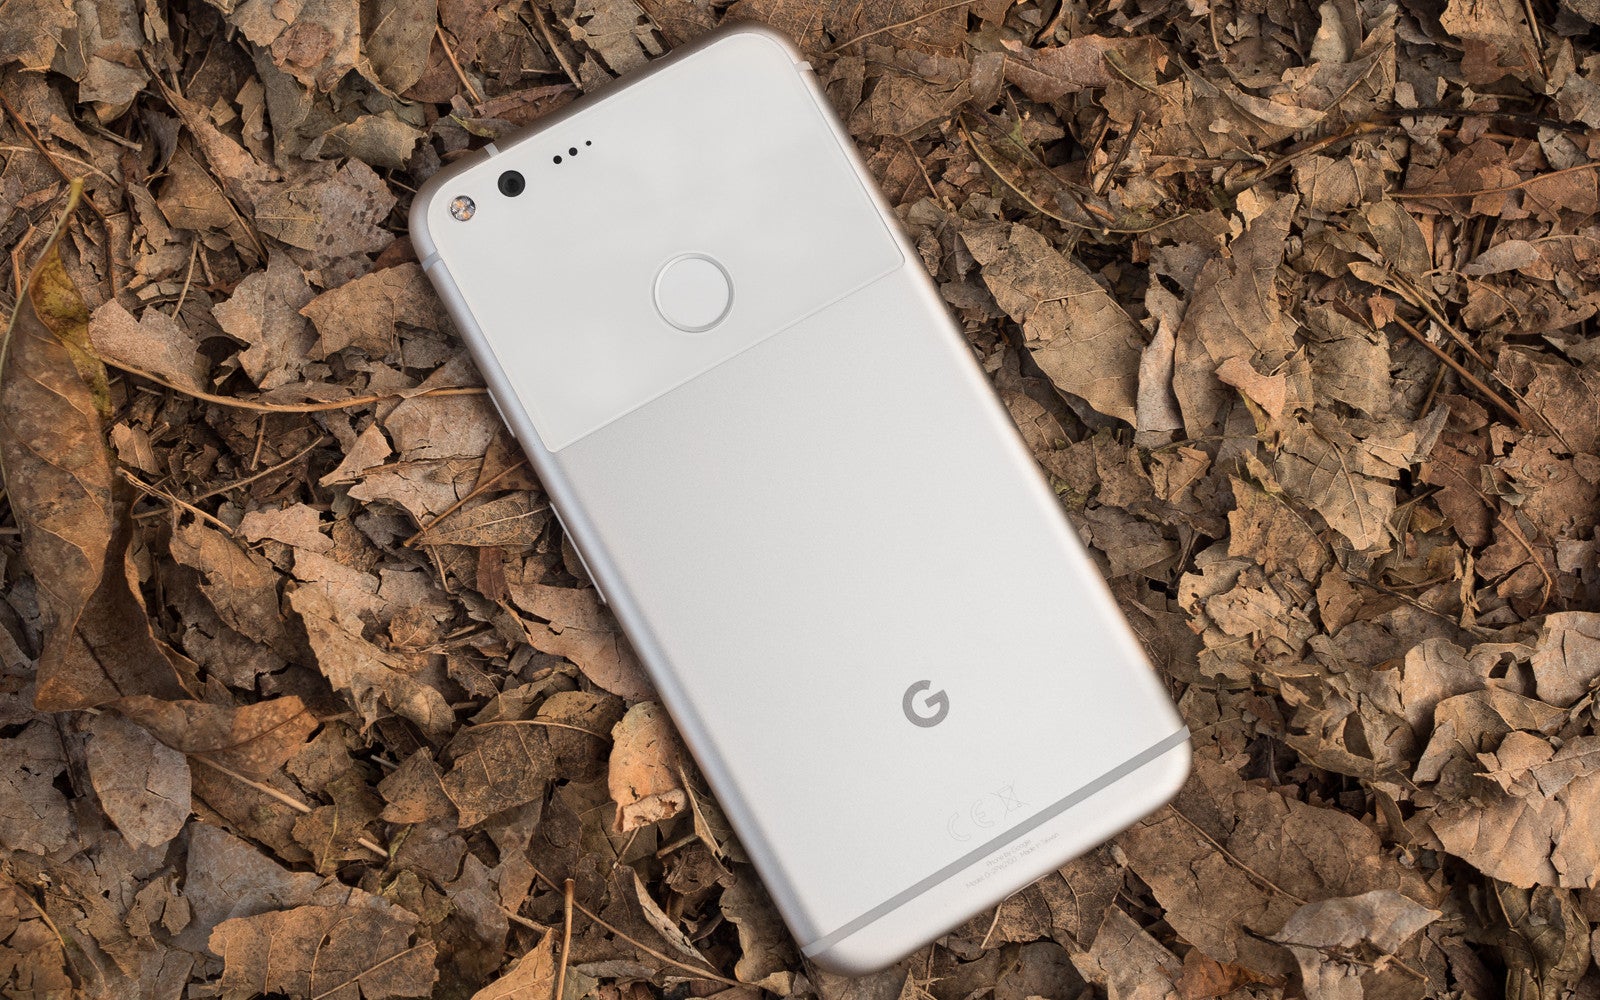 Report: First official Android O update for Pixel phones expected to arrive in August